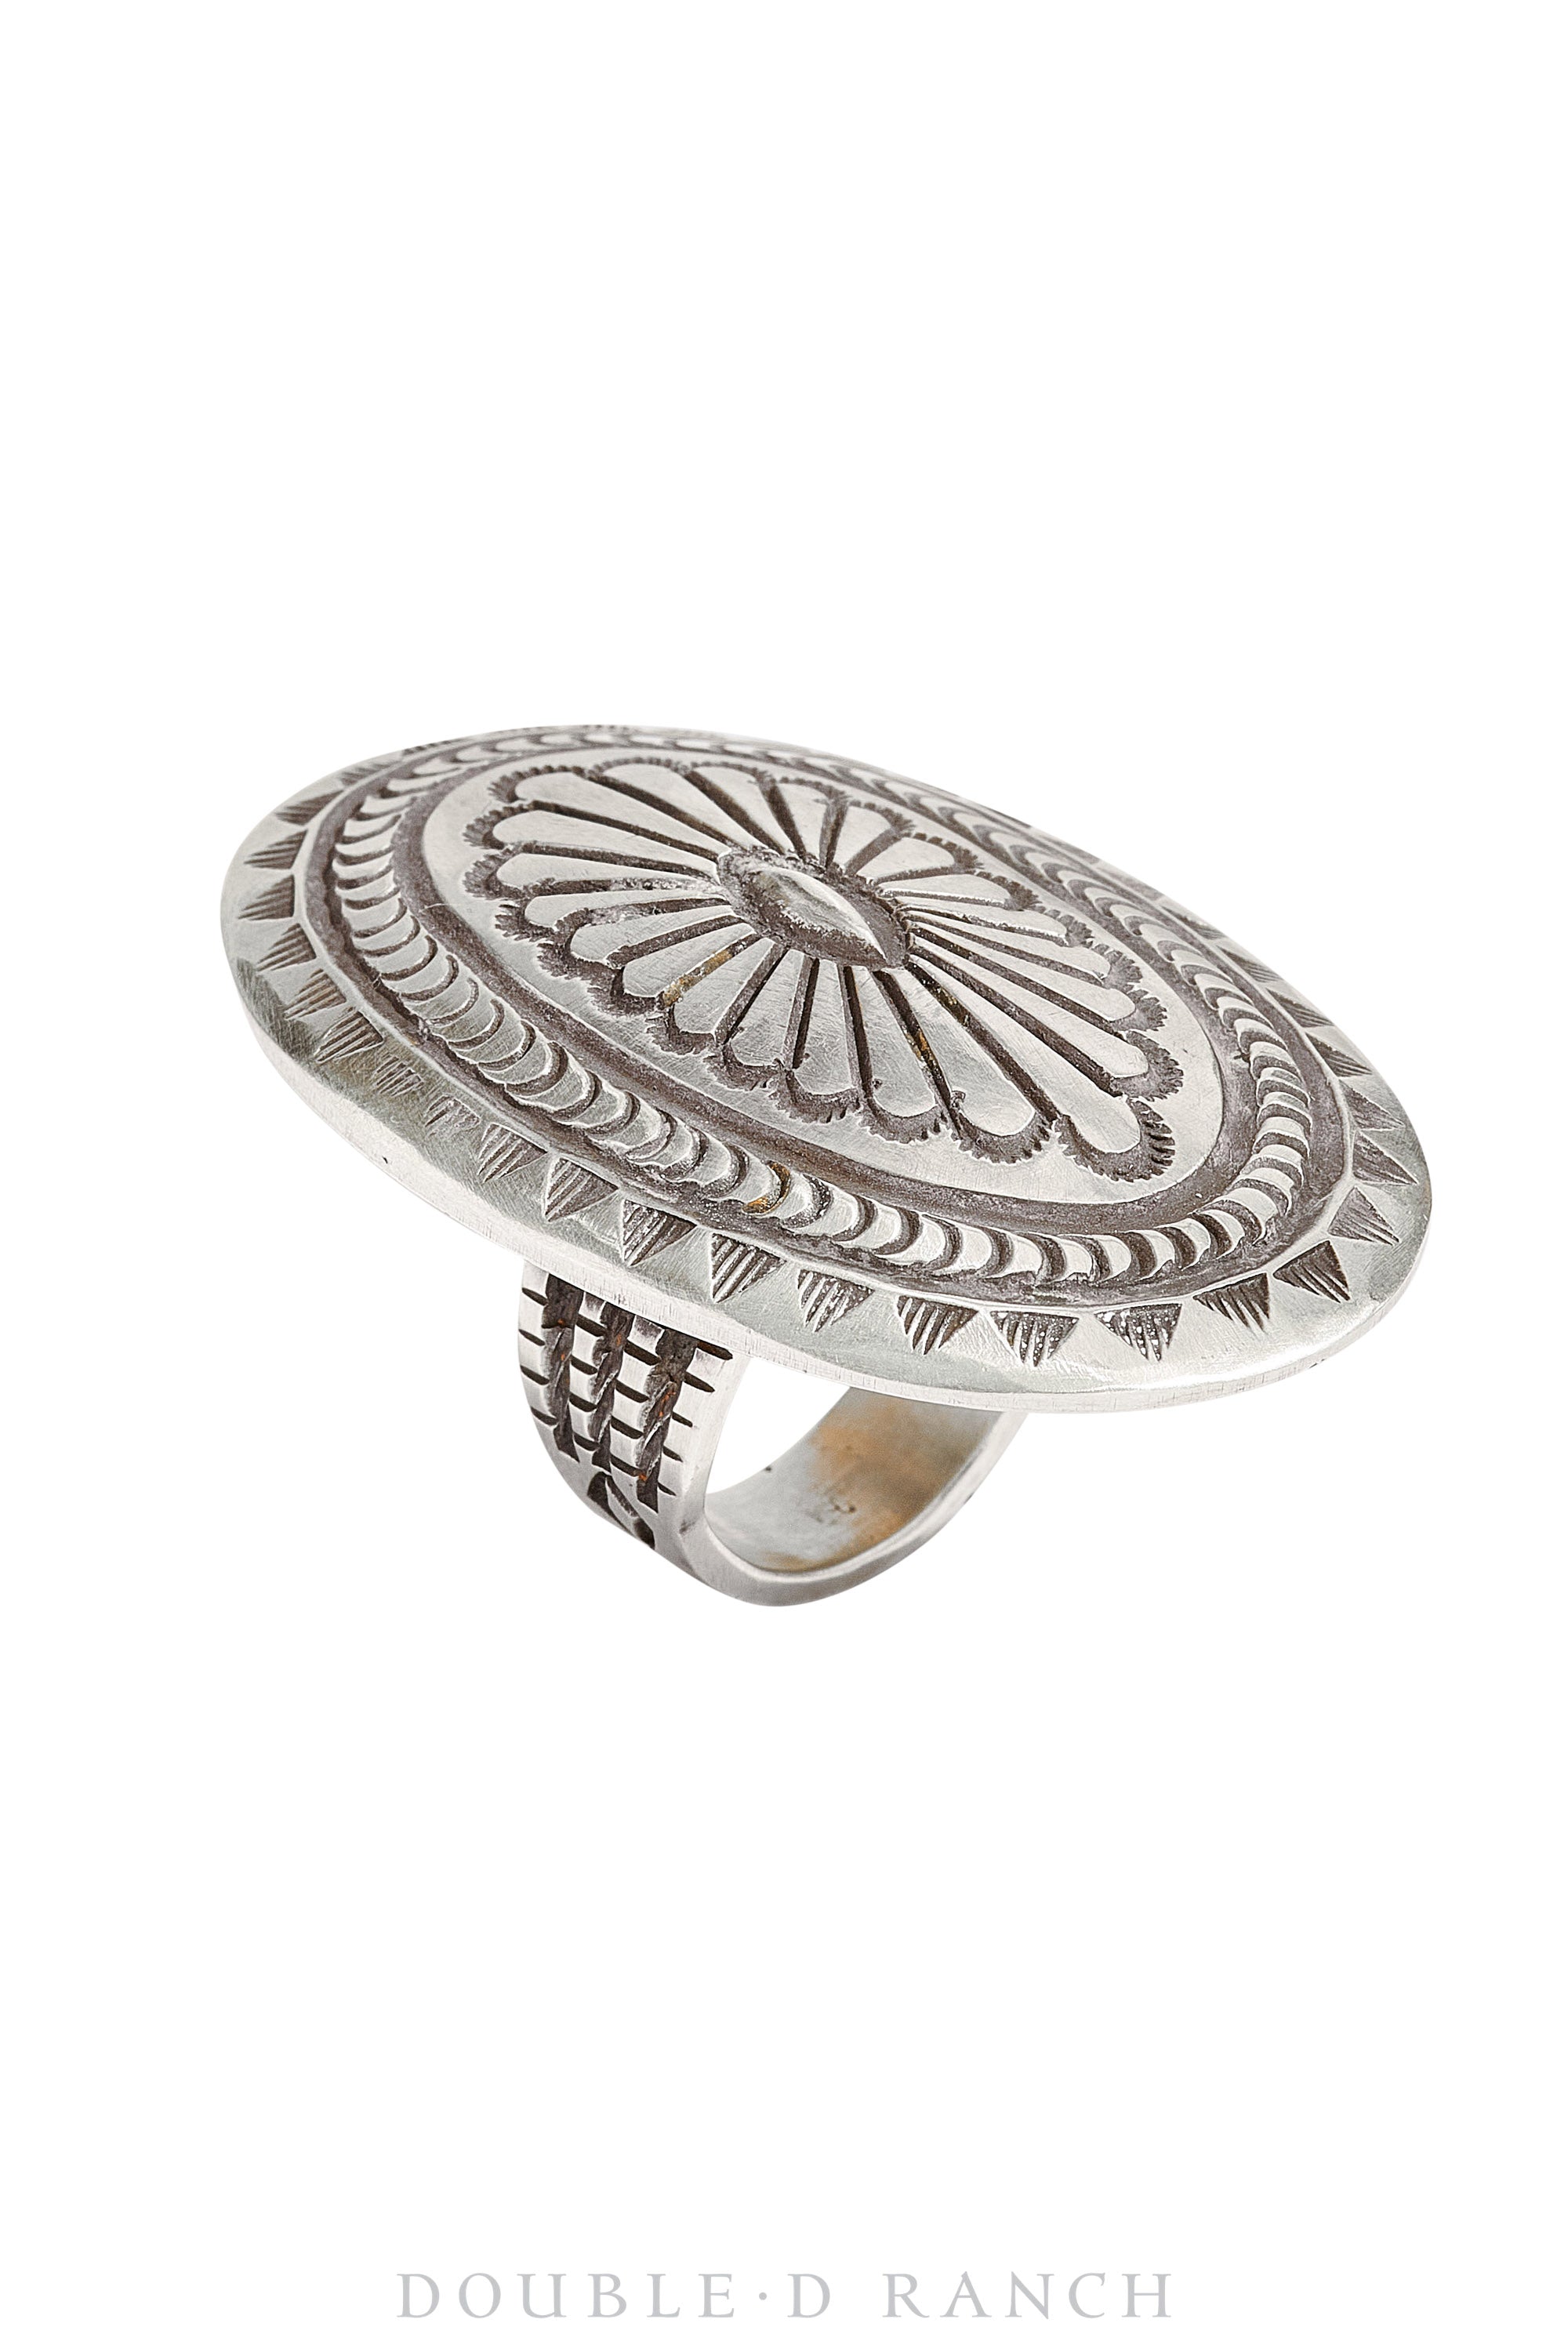 Ring, Concho, Sterling Silver, Stampwork, Artisan, Contemporary, 1073